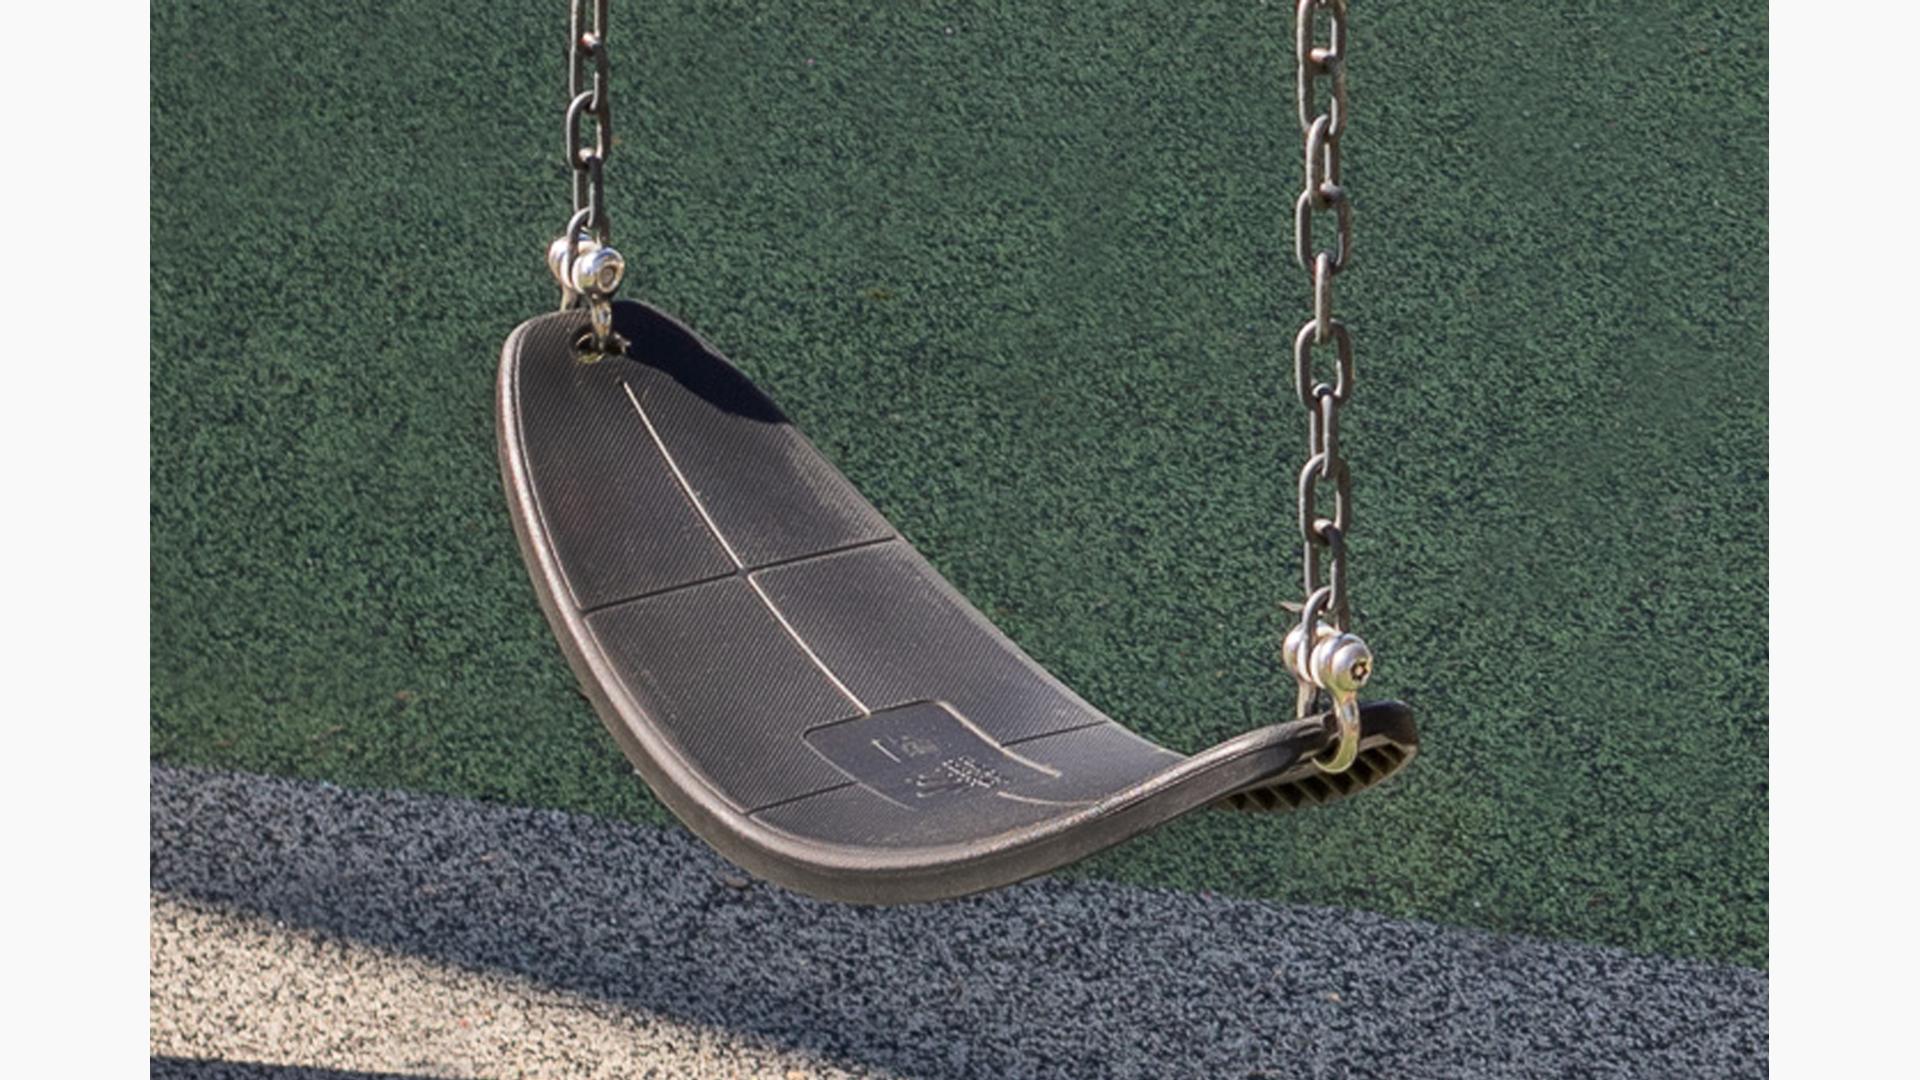 The Belt Seat with ProGuard Chains is a flexible and sturdy swing seat option for school-aged children.